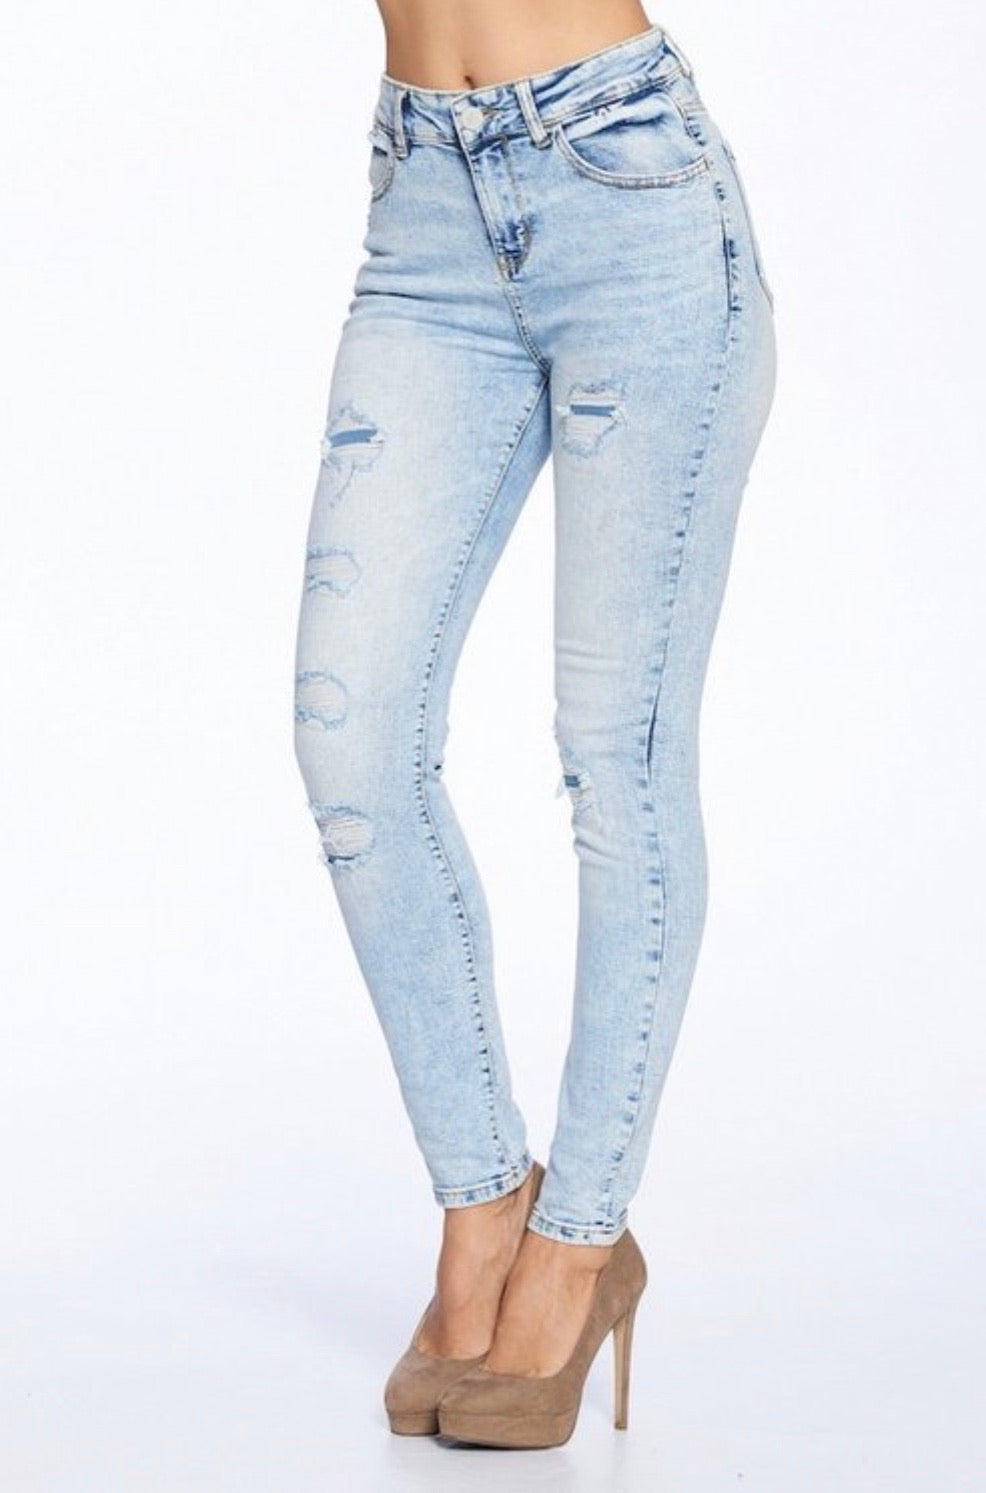 Missy High Rise Distressed Skinny Jeans - Corinne Boutique Family Owned and Operated USA